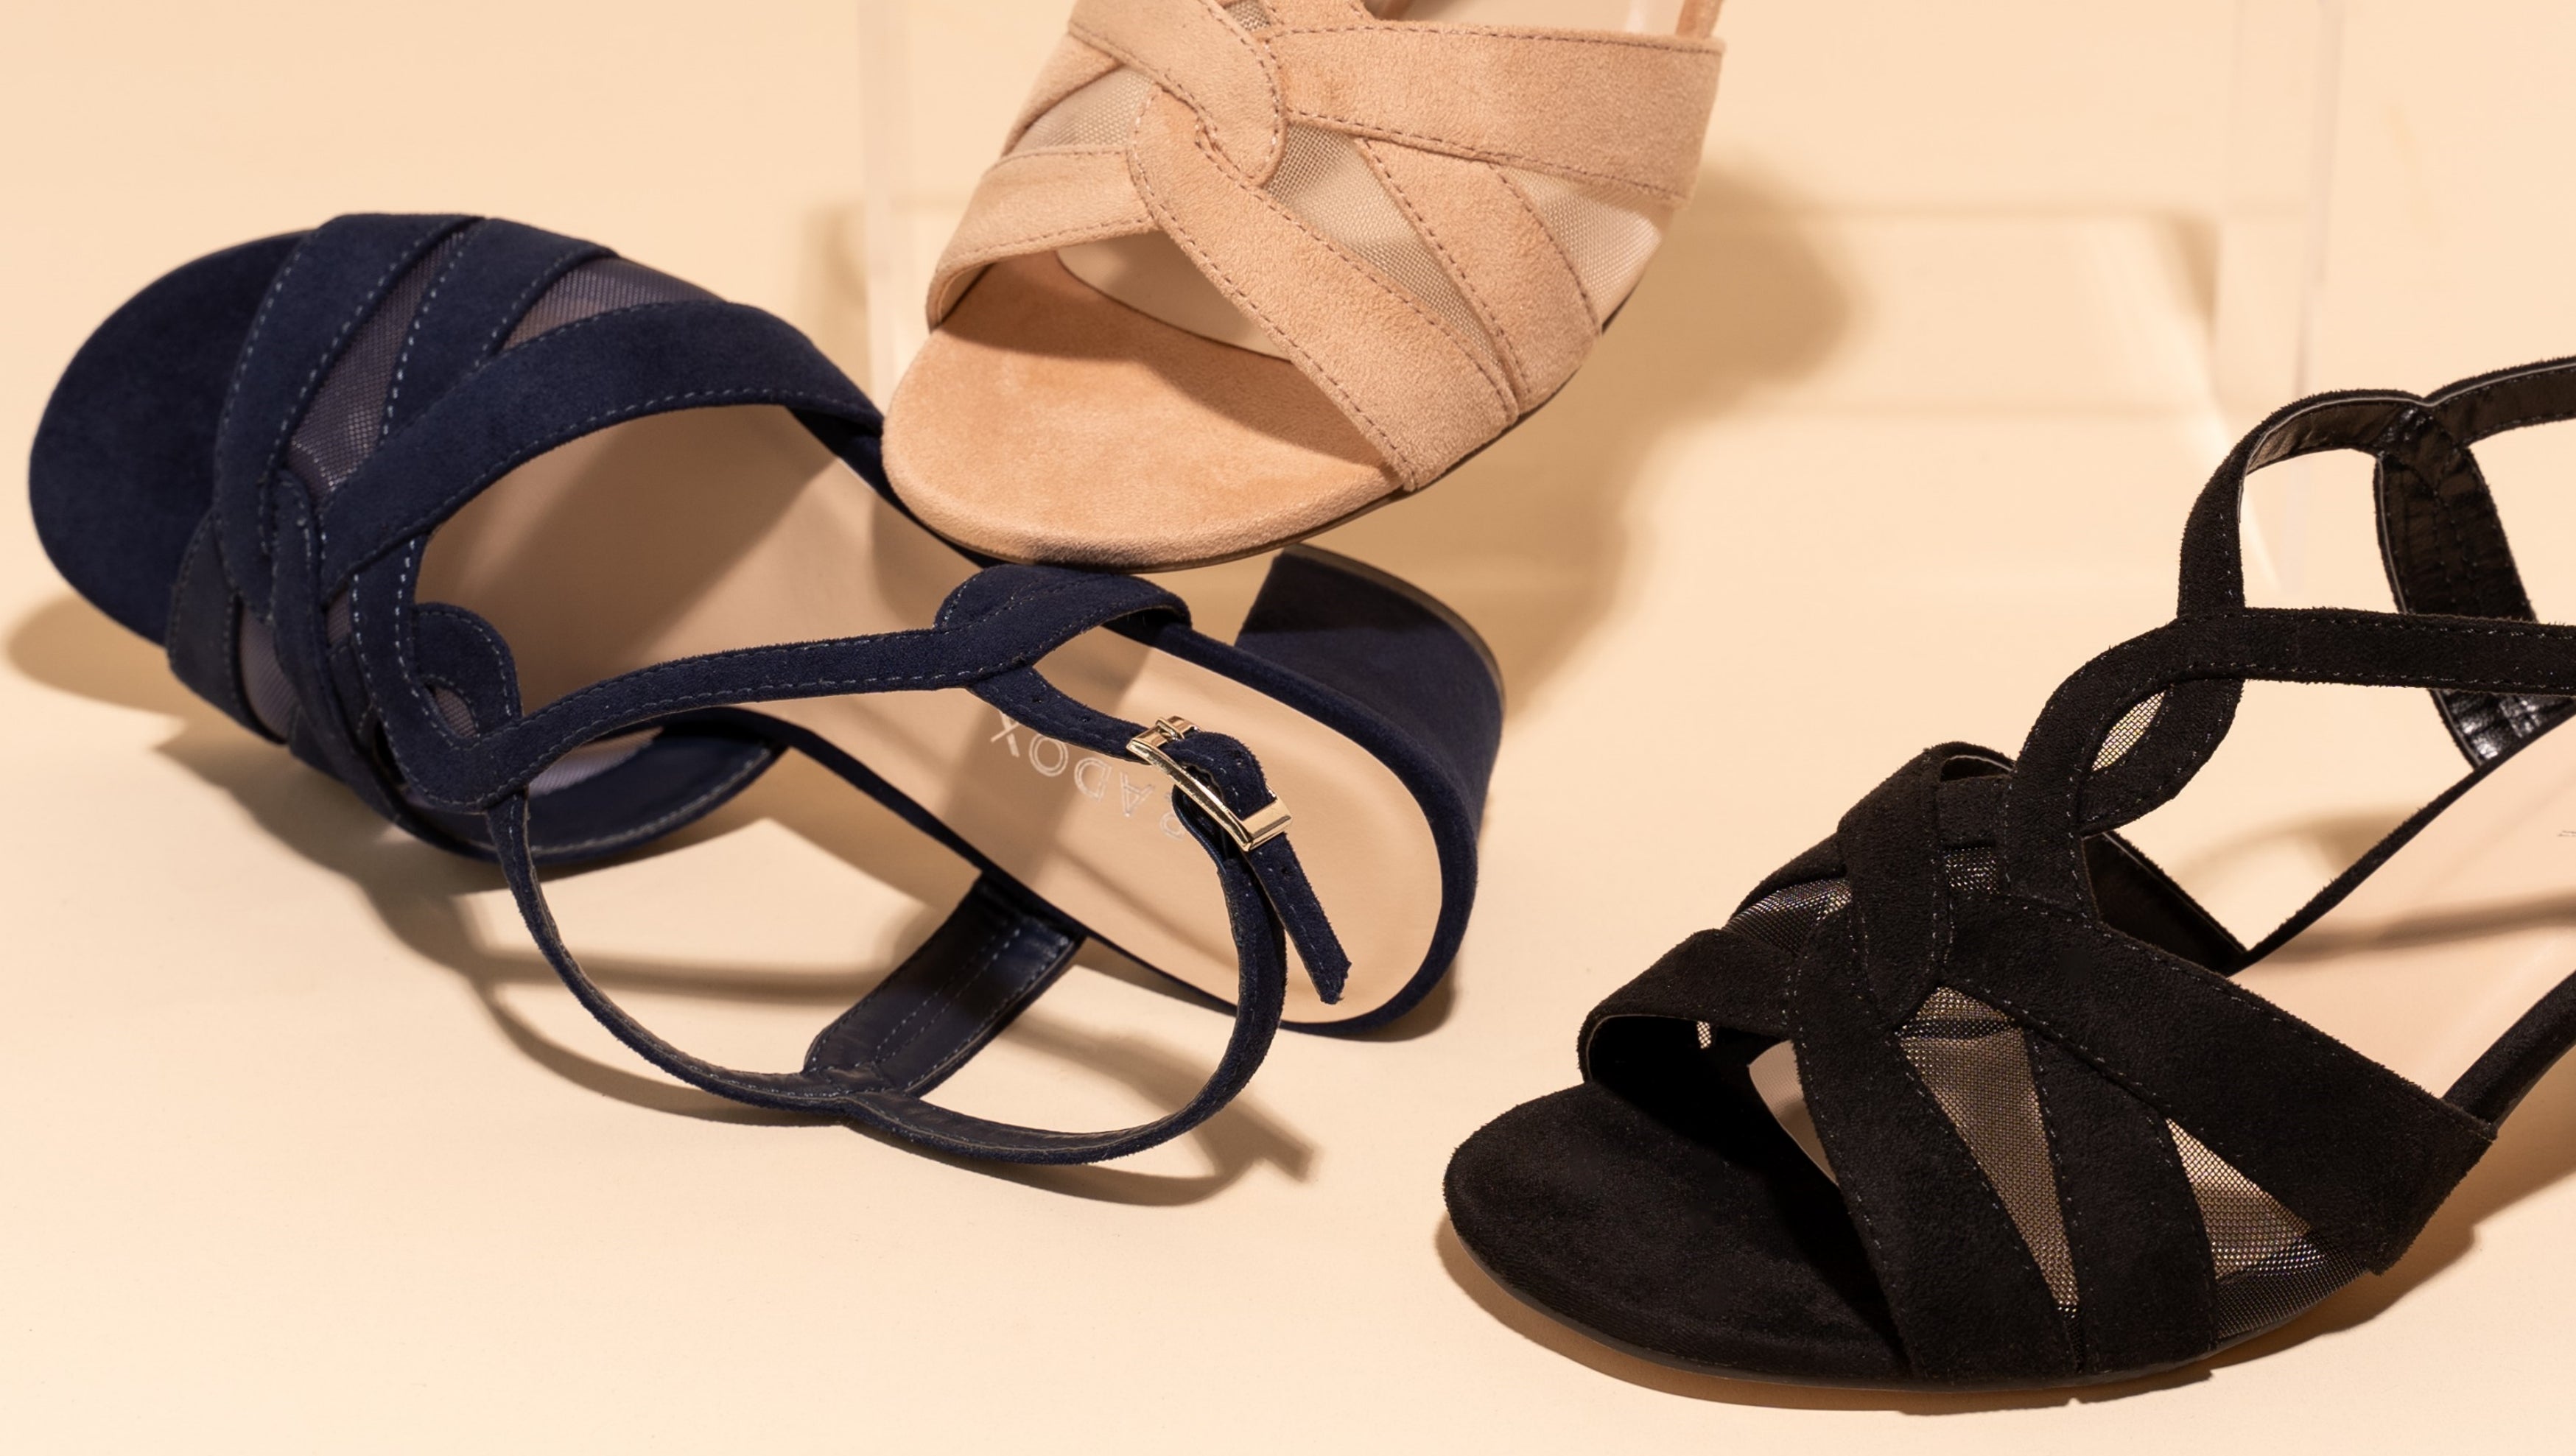 Wide Fit Wedding Shoe Styles: Our favourite silver sandals and shoes online